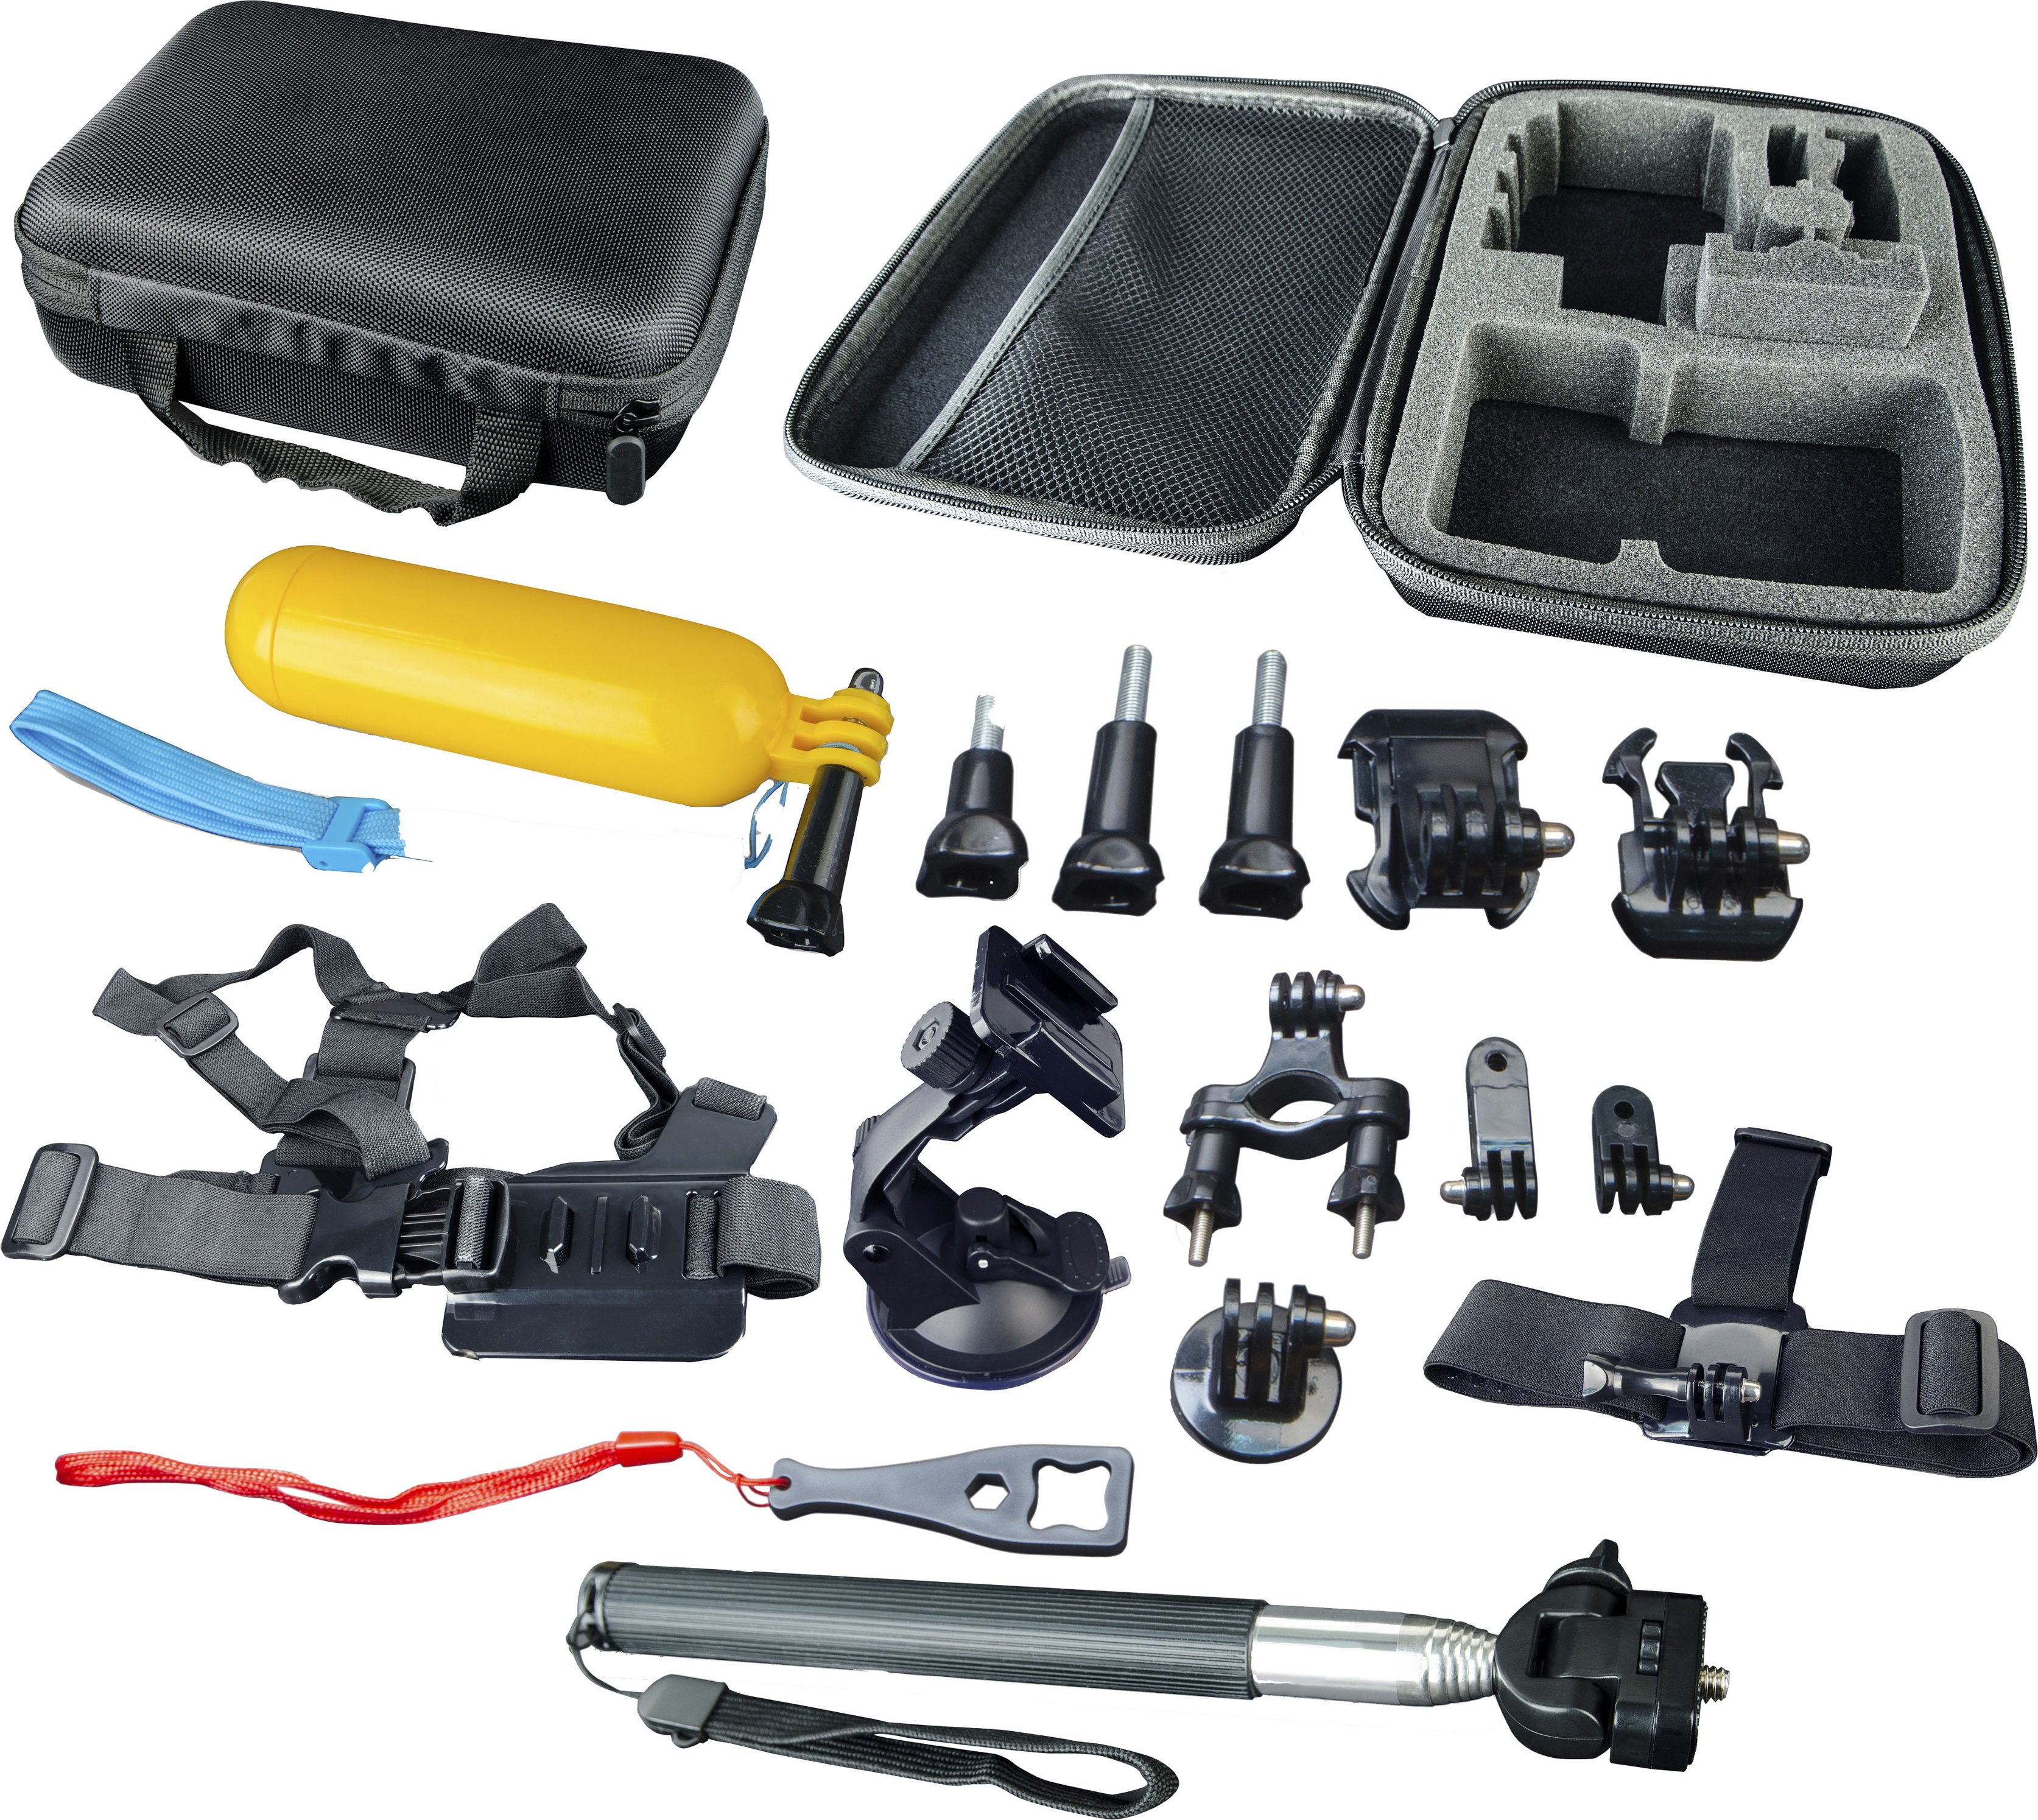 Digipower - Mount Accessories Kit for Action Cameras (15 piece)